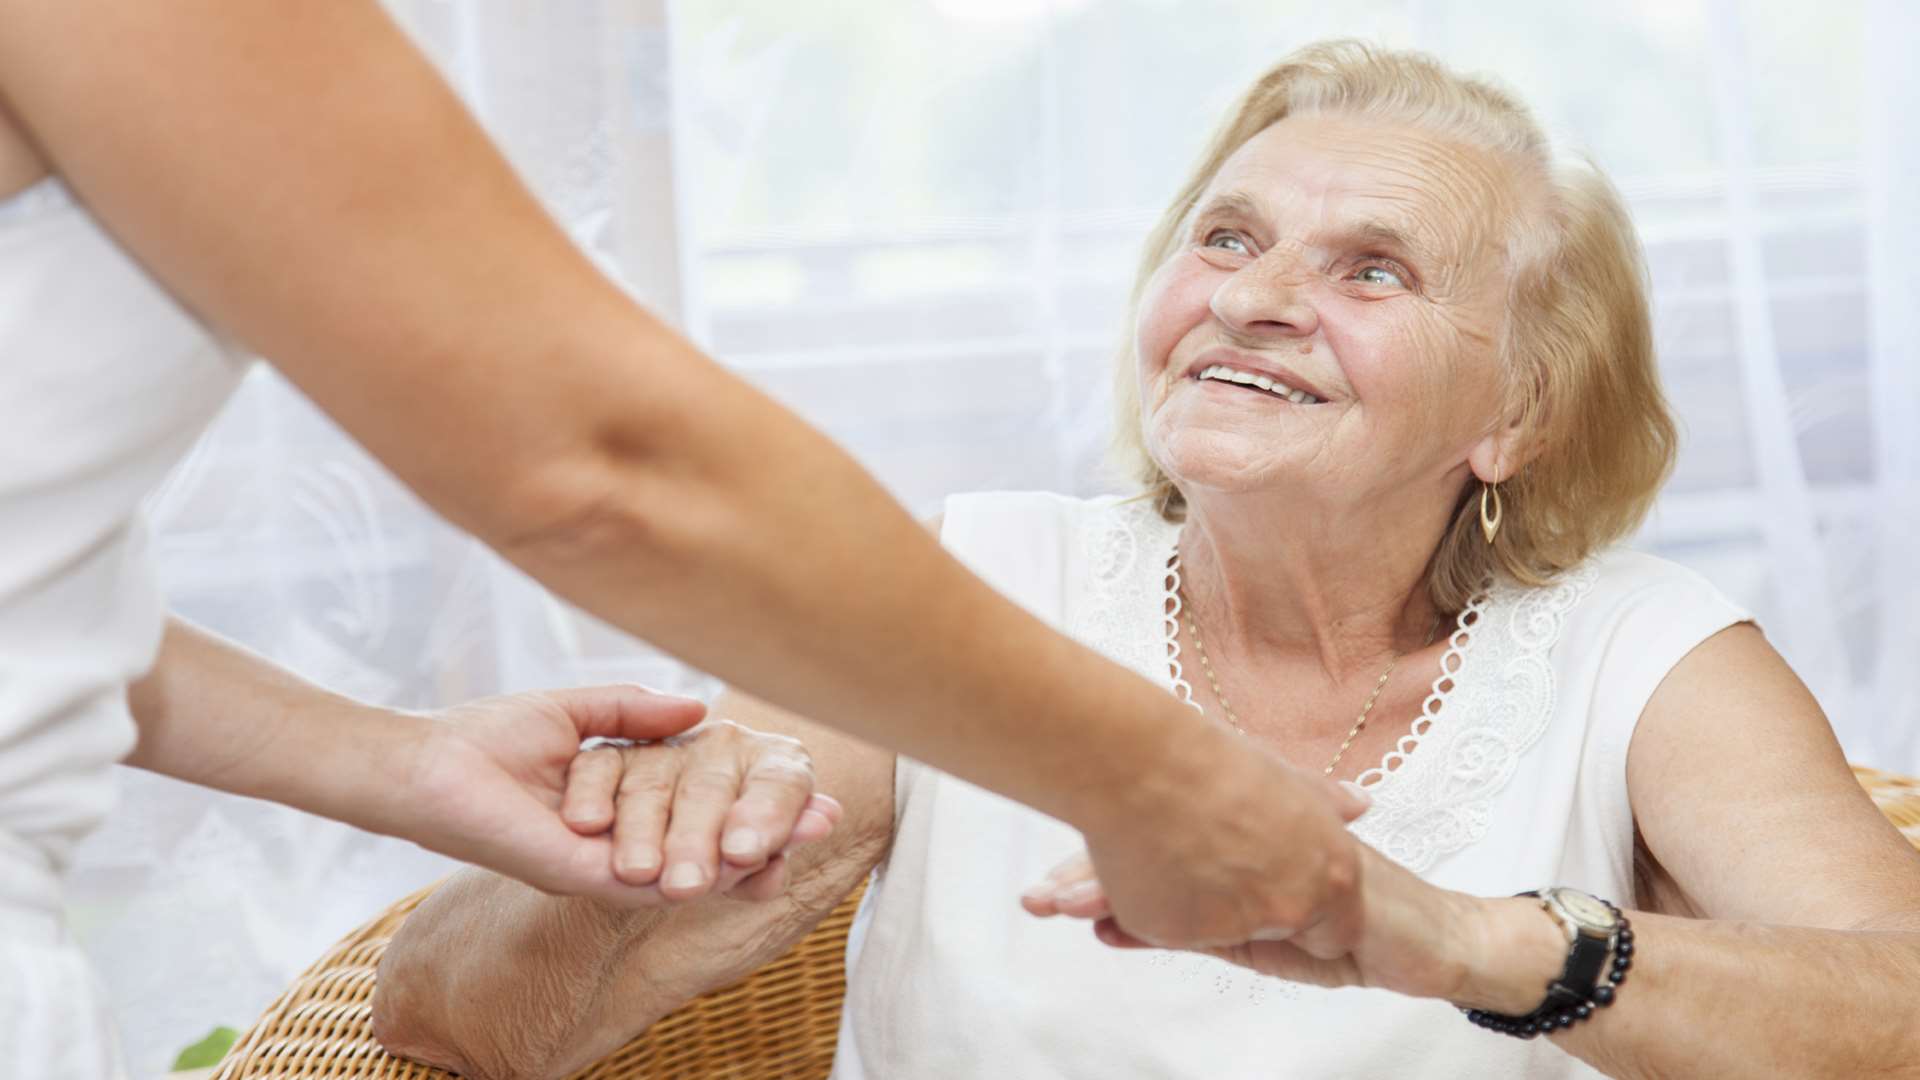 The women worked to improve care for frail patients. Stock image